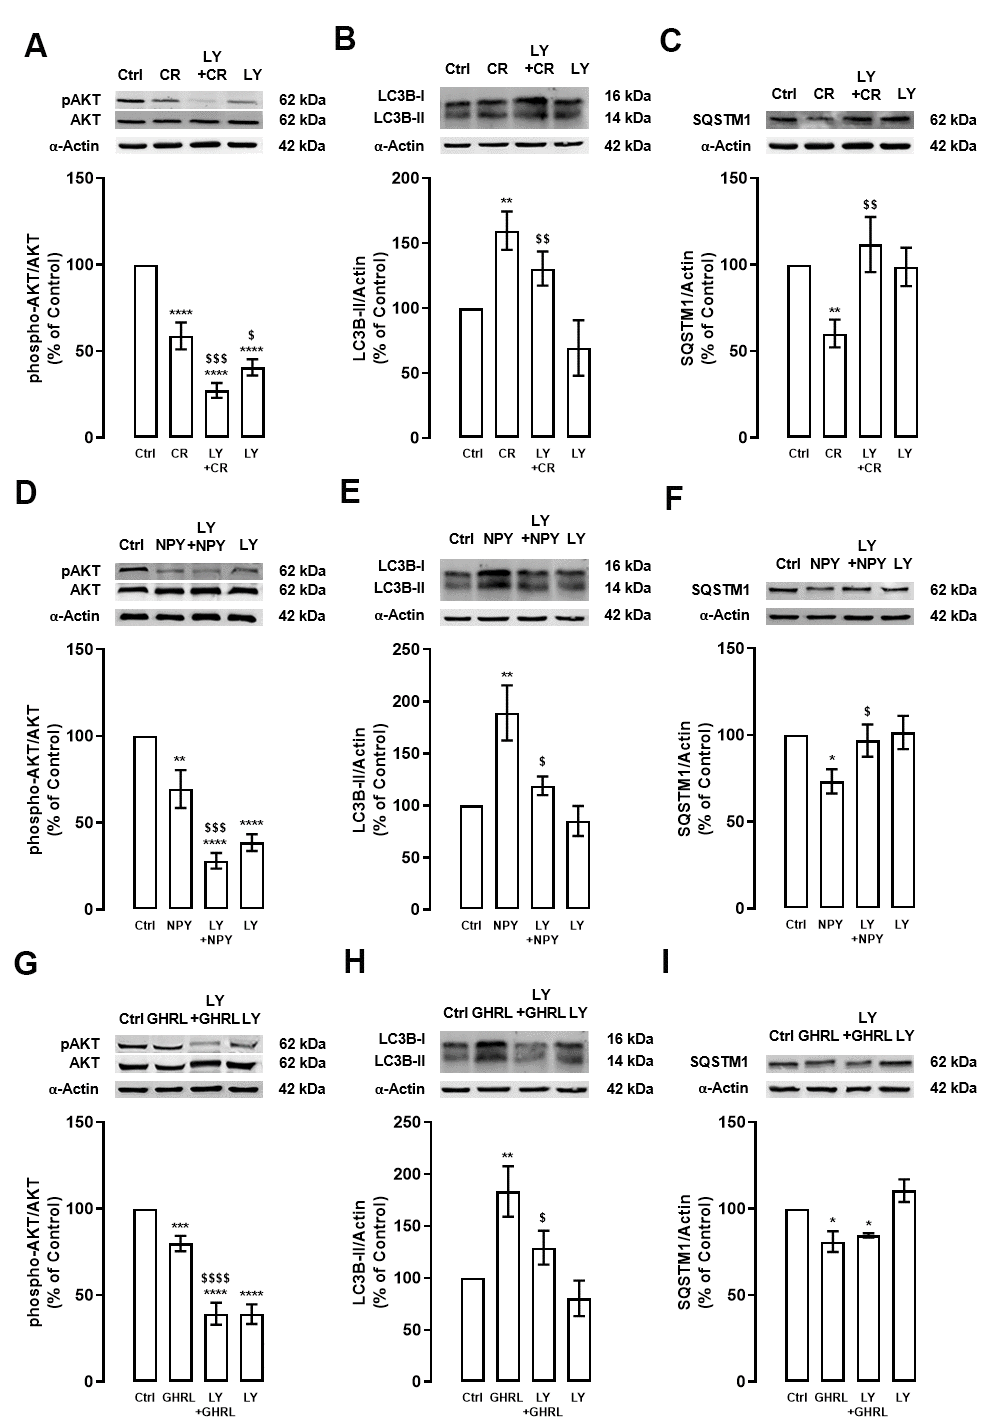 The stimulatory effect of caloric restriction, NPY, and ghrelin on autophagy in cortical neurons is mediated by the inhibition of PI3K/AKT. Primary rat cortical neurons were exposed to caloric restriction mimic medium (CR) - DMEM low glucose, NPY (100 nM) or ghrelin (GHRL, 10 nM) for 6 h. Untreated cells were used as control (Ctrl). (A–I) Cells were incubated with PI3K/AKT inhibitor (LY294002 (LY), 1 μM), 30 min before caloric restriction, NPY, or ghrelin treatment. Whole-cell extracts were assayed, phospho-AKT (A, D, G), LC3B-II (B, E, H), SQSTM1 (C, F, I) and AKT or α-Actin (loading control) immunoreactivity through Western blotting analysis, as described in Materials and Methods. Representative Western blots for each protein are presented above each respective graph. The results represent the mean±SEM of, at least, four independents experiments, and are expressed as a percentage of control. *p$p$$p$$$p$$$$p